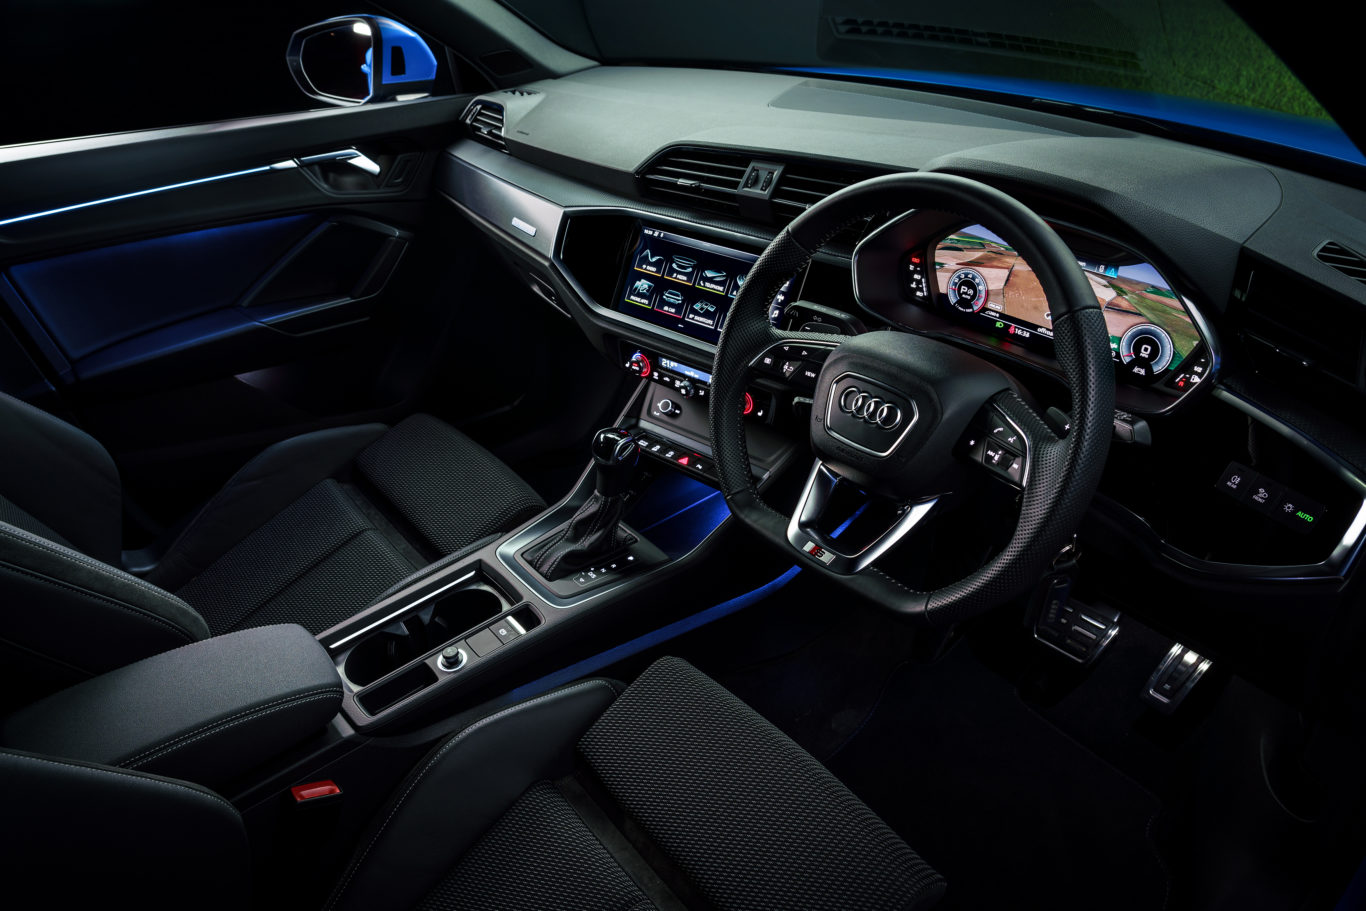 The interior of the Q3 is impressively well-made